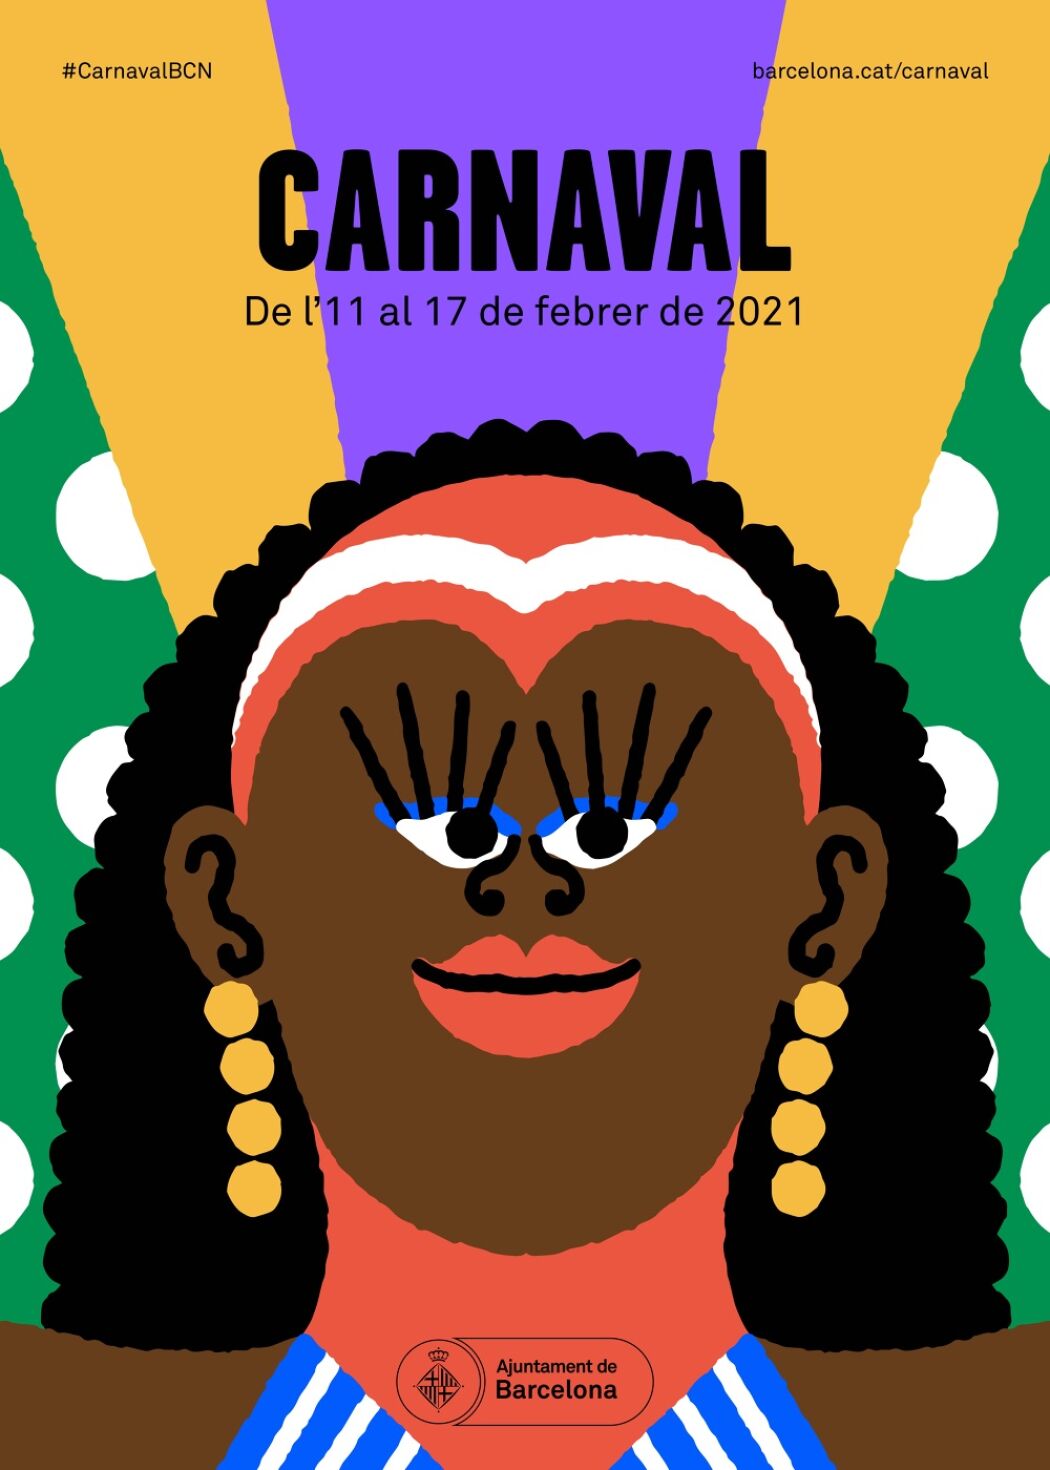 Huge Outdoor advertising Campaign and poster design for Carnaval illustrated by José Antonio Roda